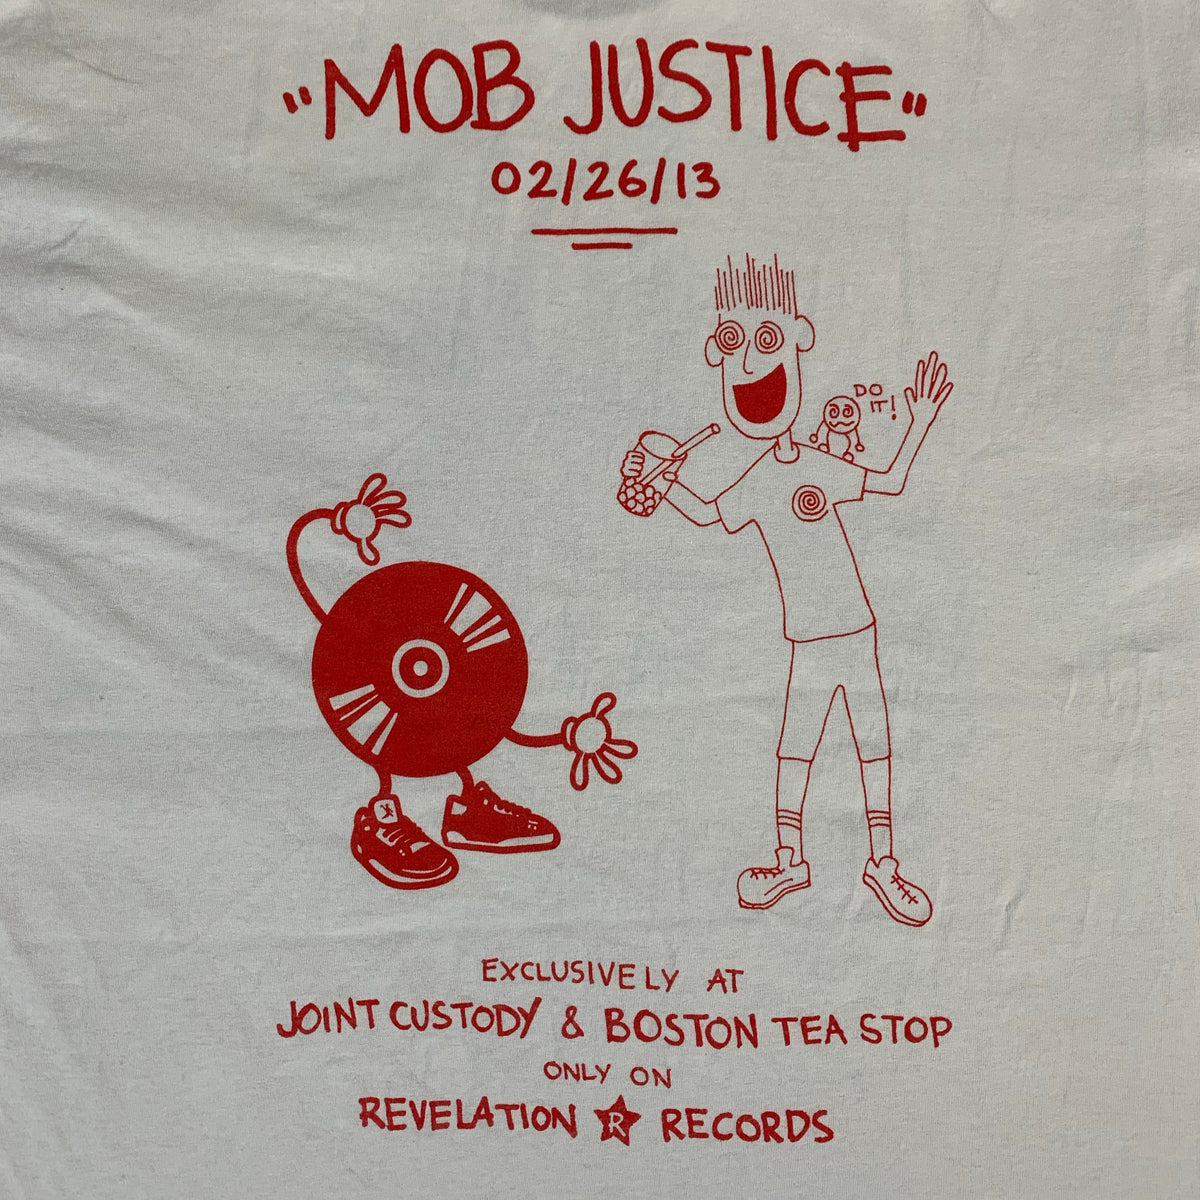 The Rival Mob “Joint Custody” Mob Justice T-Shirt